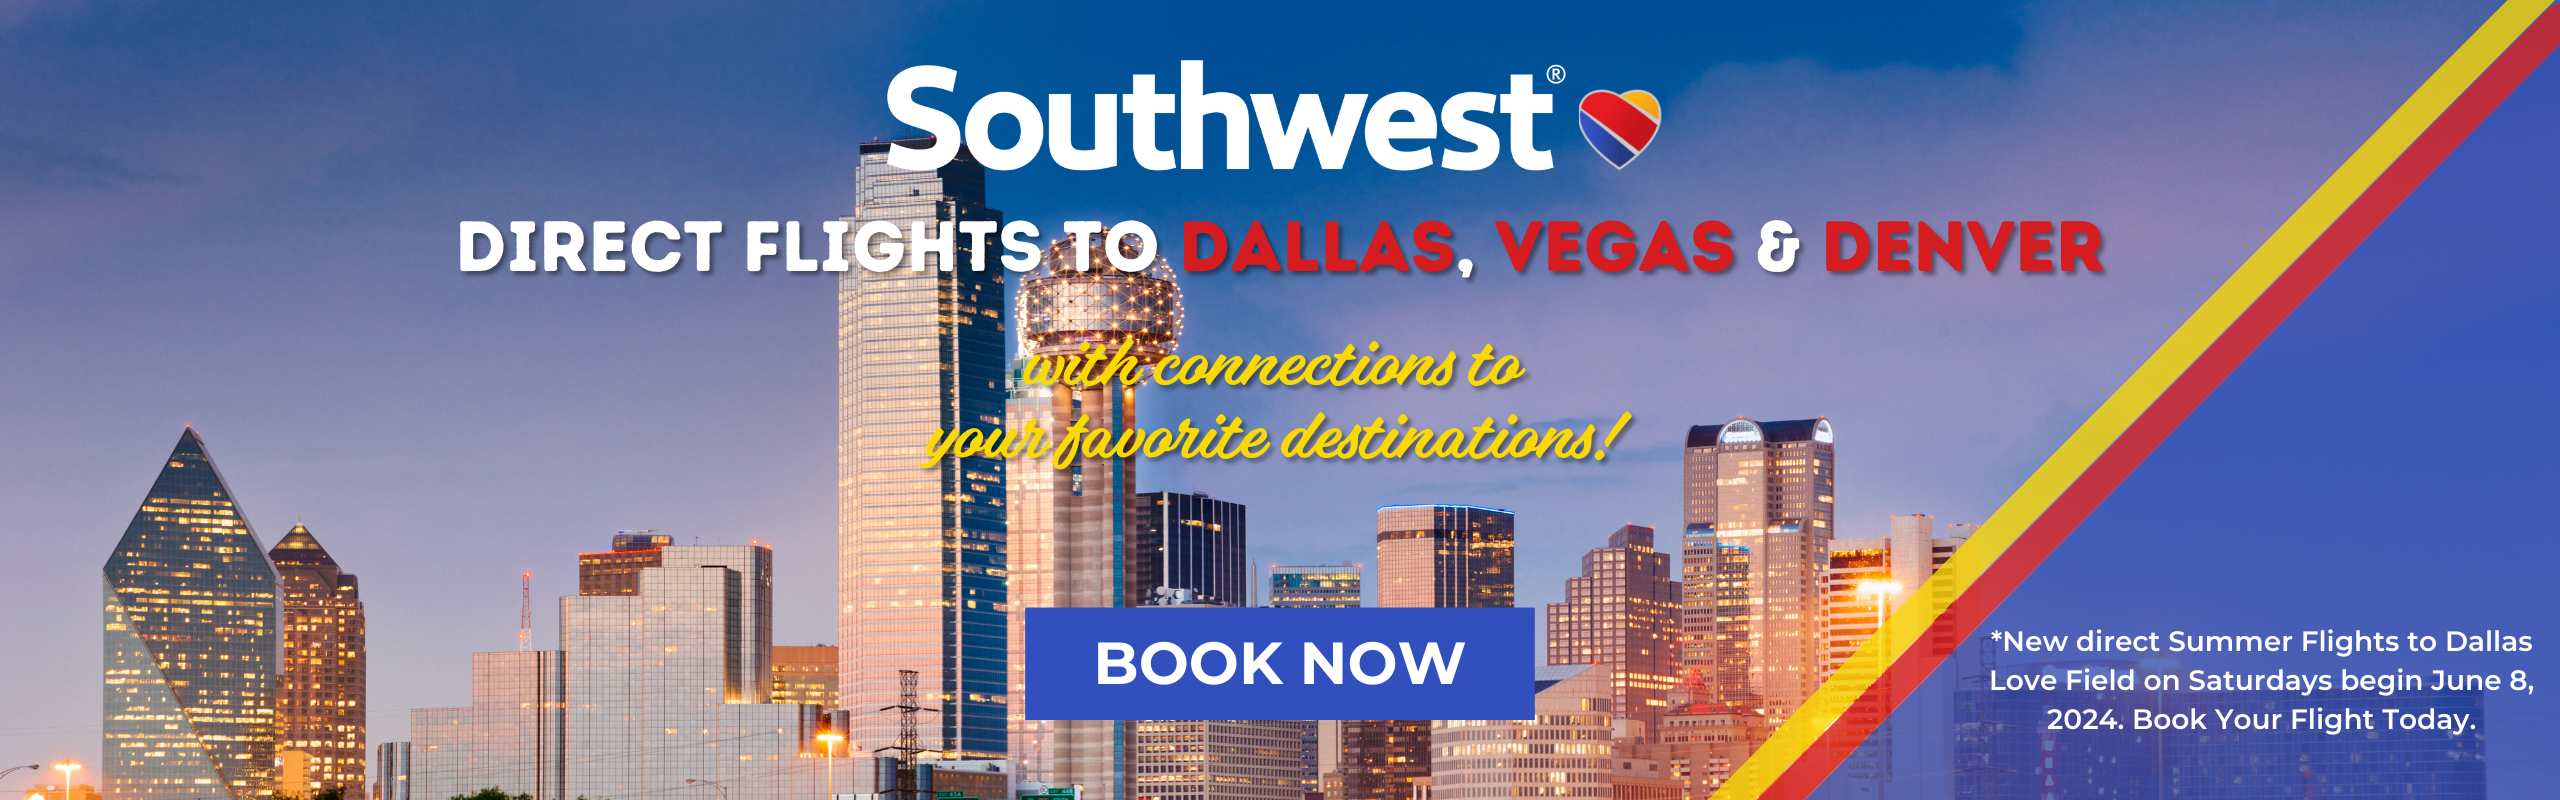 Southwest airlines full page slider to Dallas, Vegas, and Denver